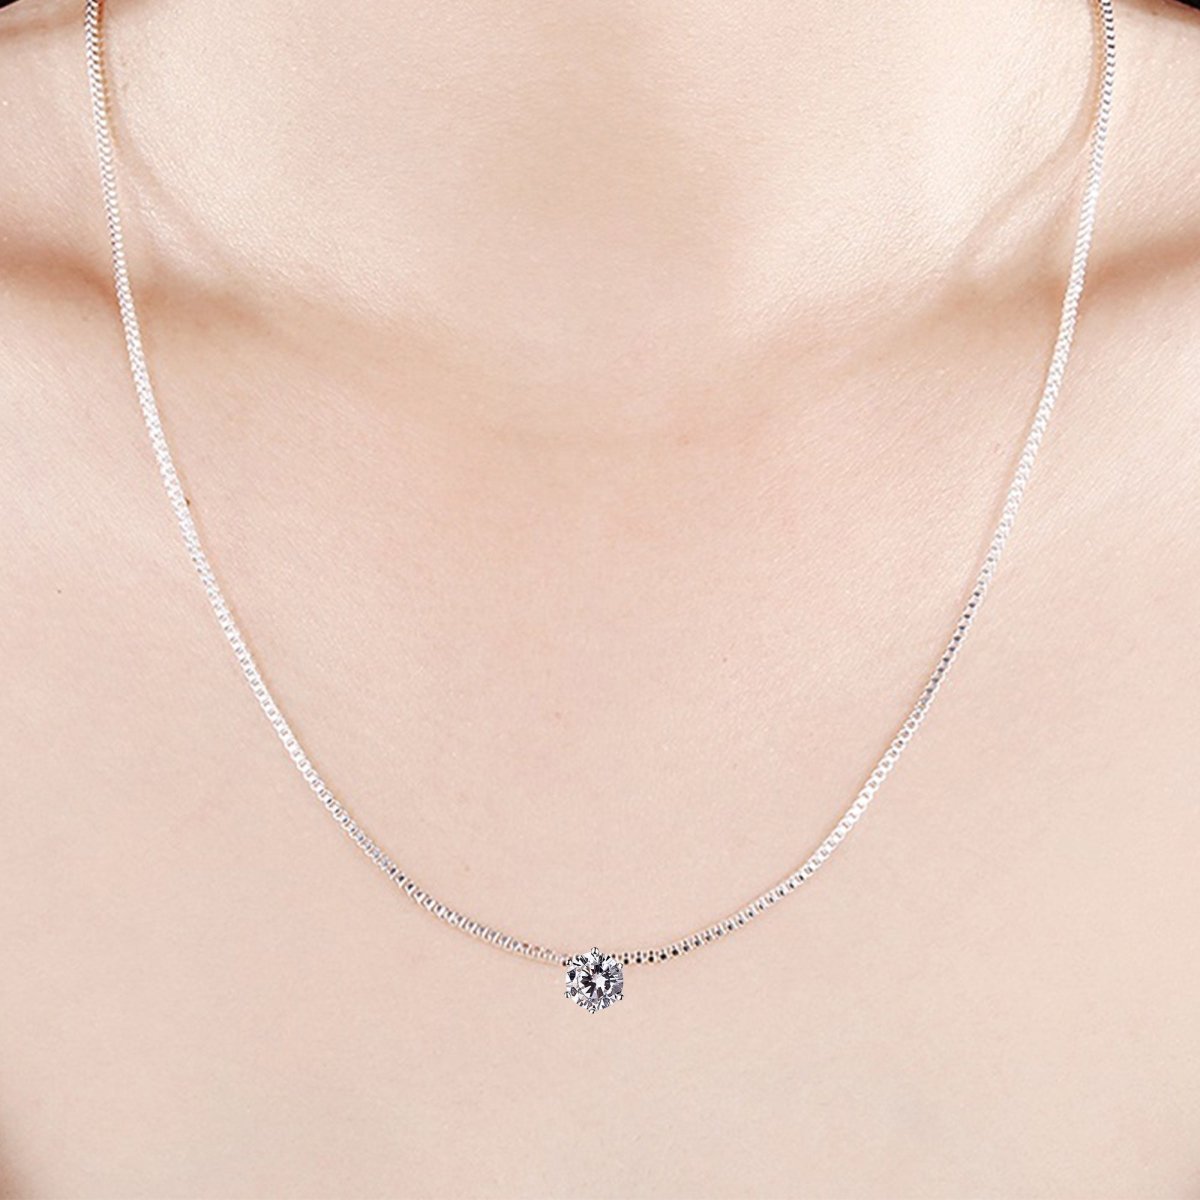 Stepdaughter Gift - Dainty CZ Sterling Silver Necklace - Meaningful Cards